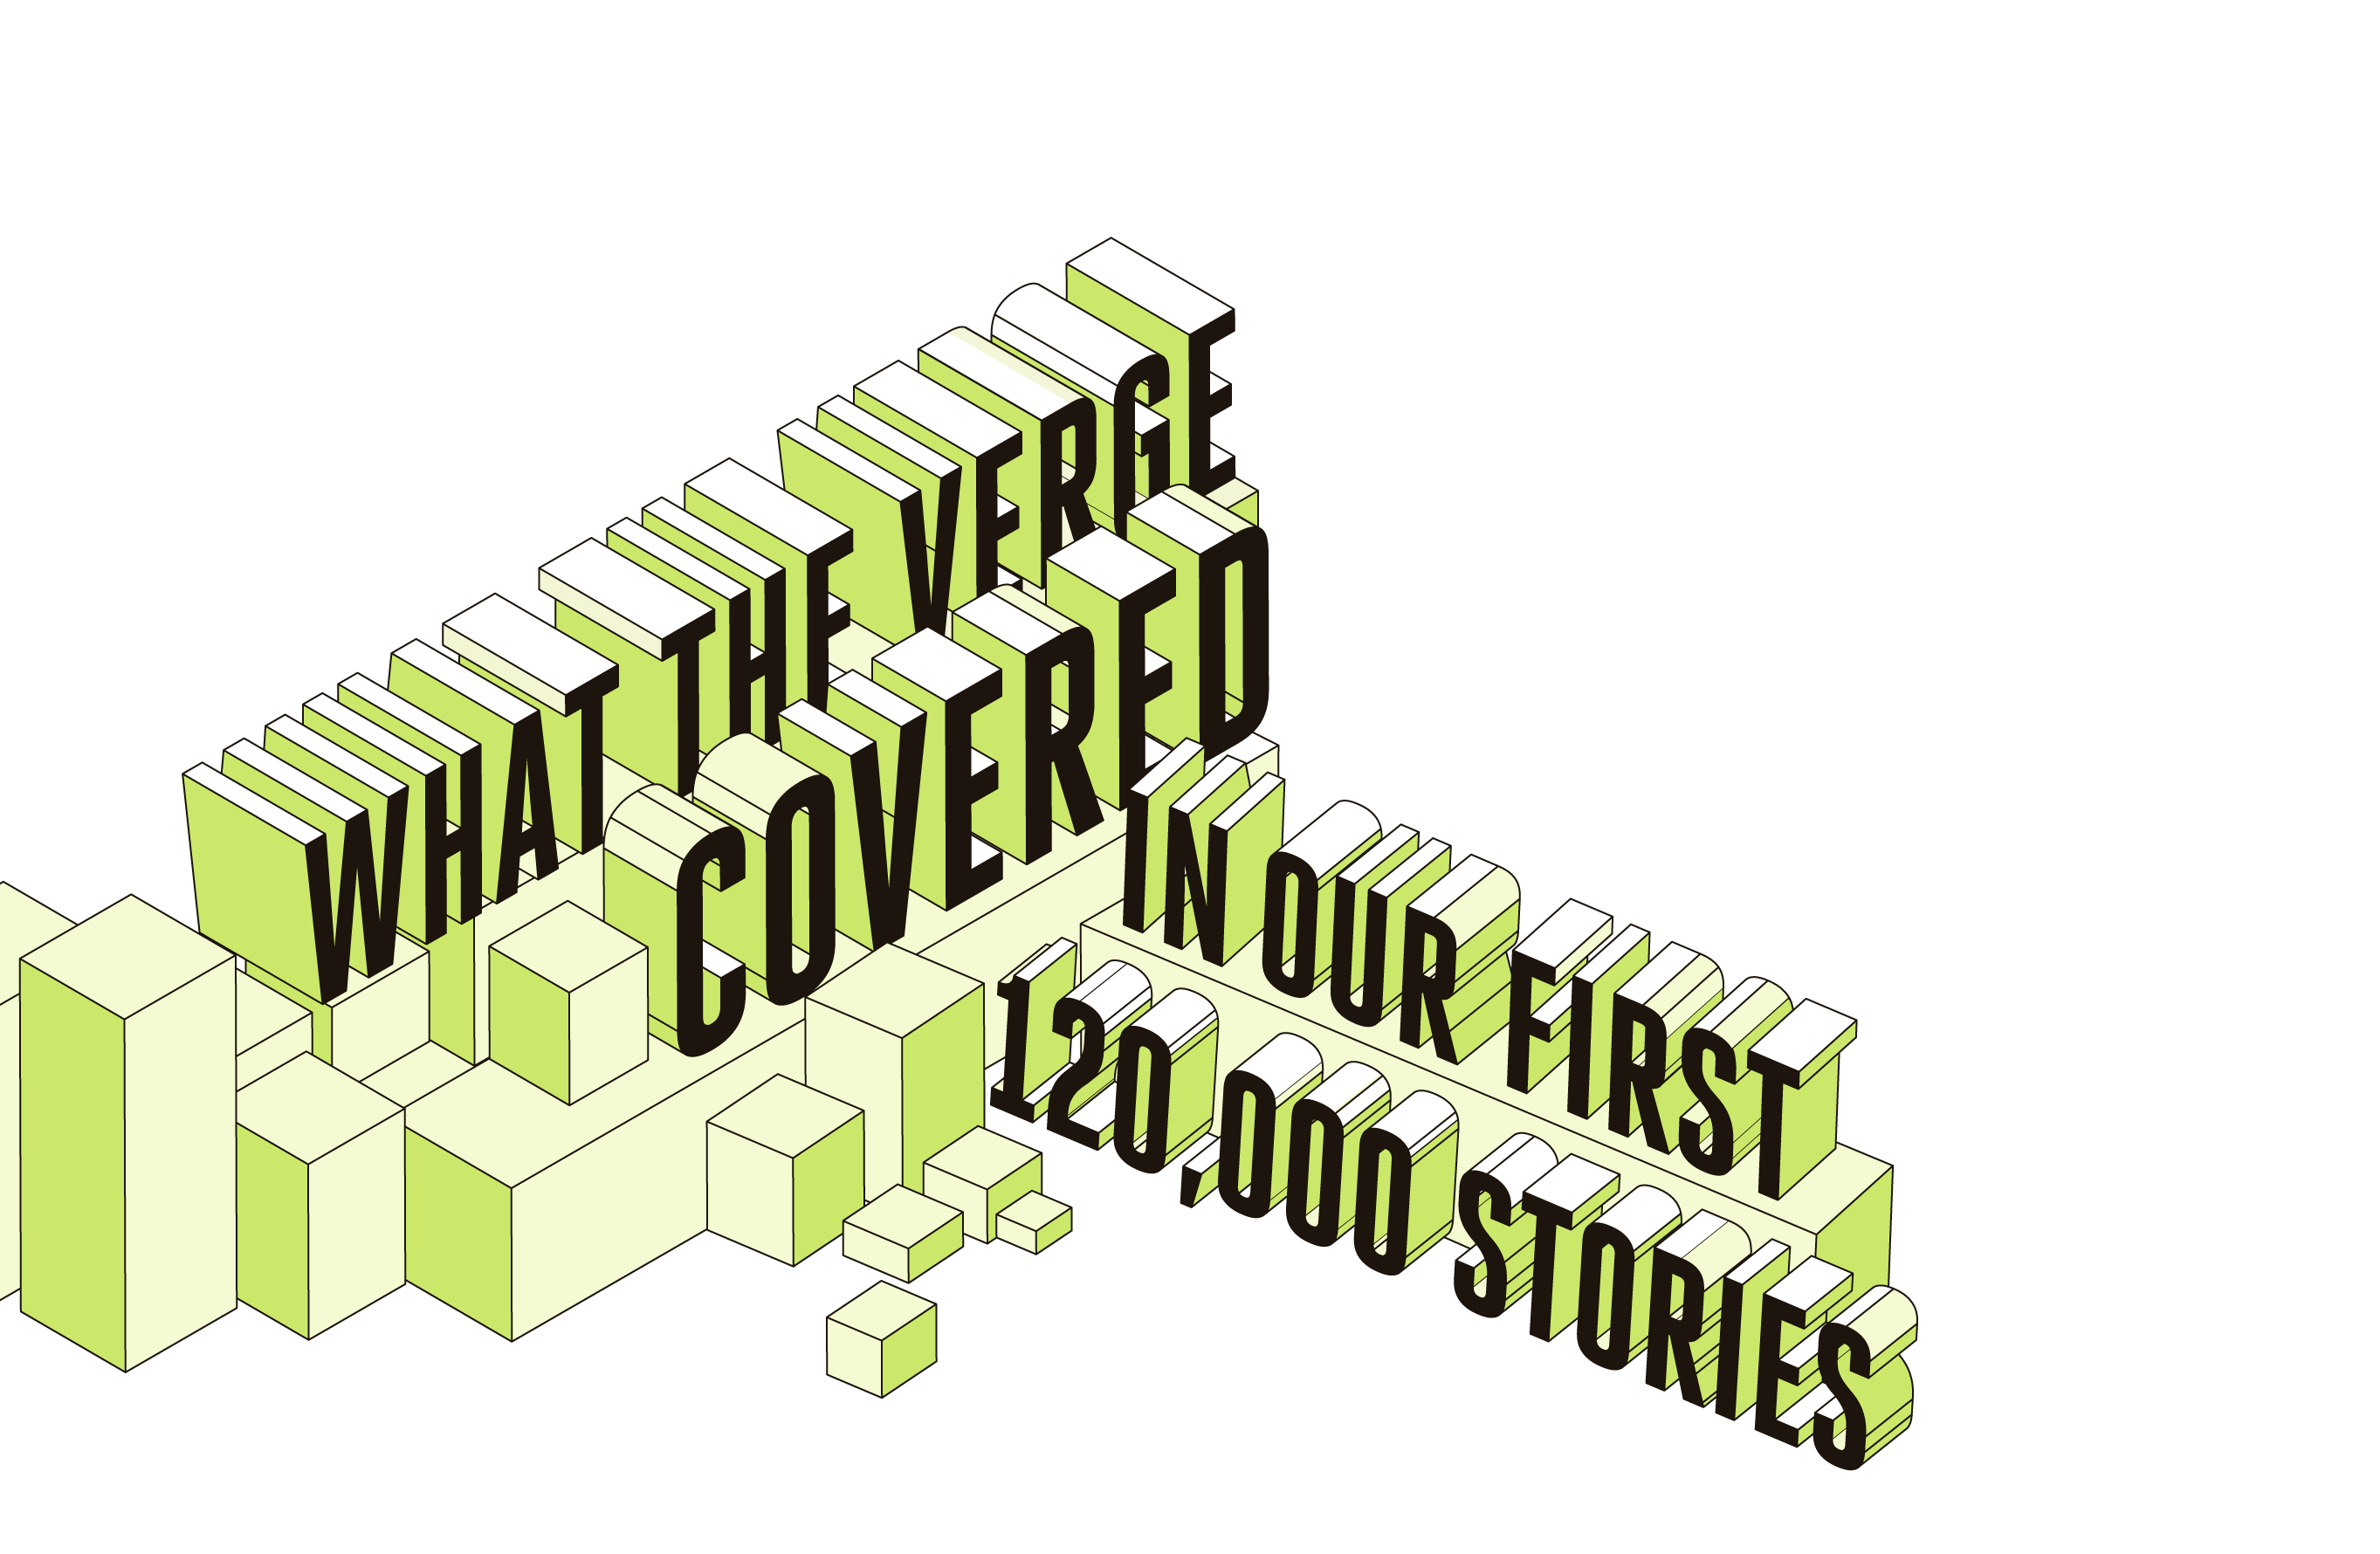 What The Verge covered in our first 120,000 stories